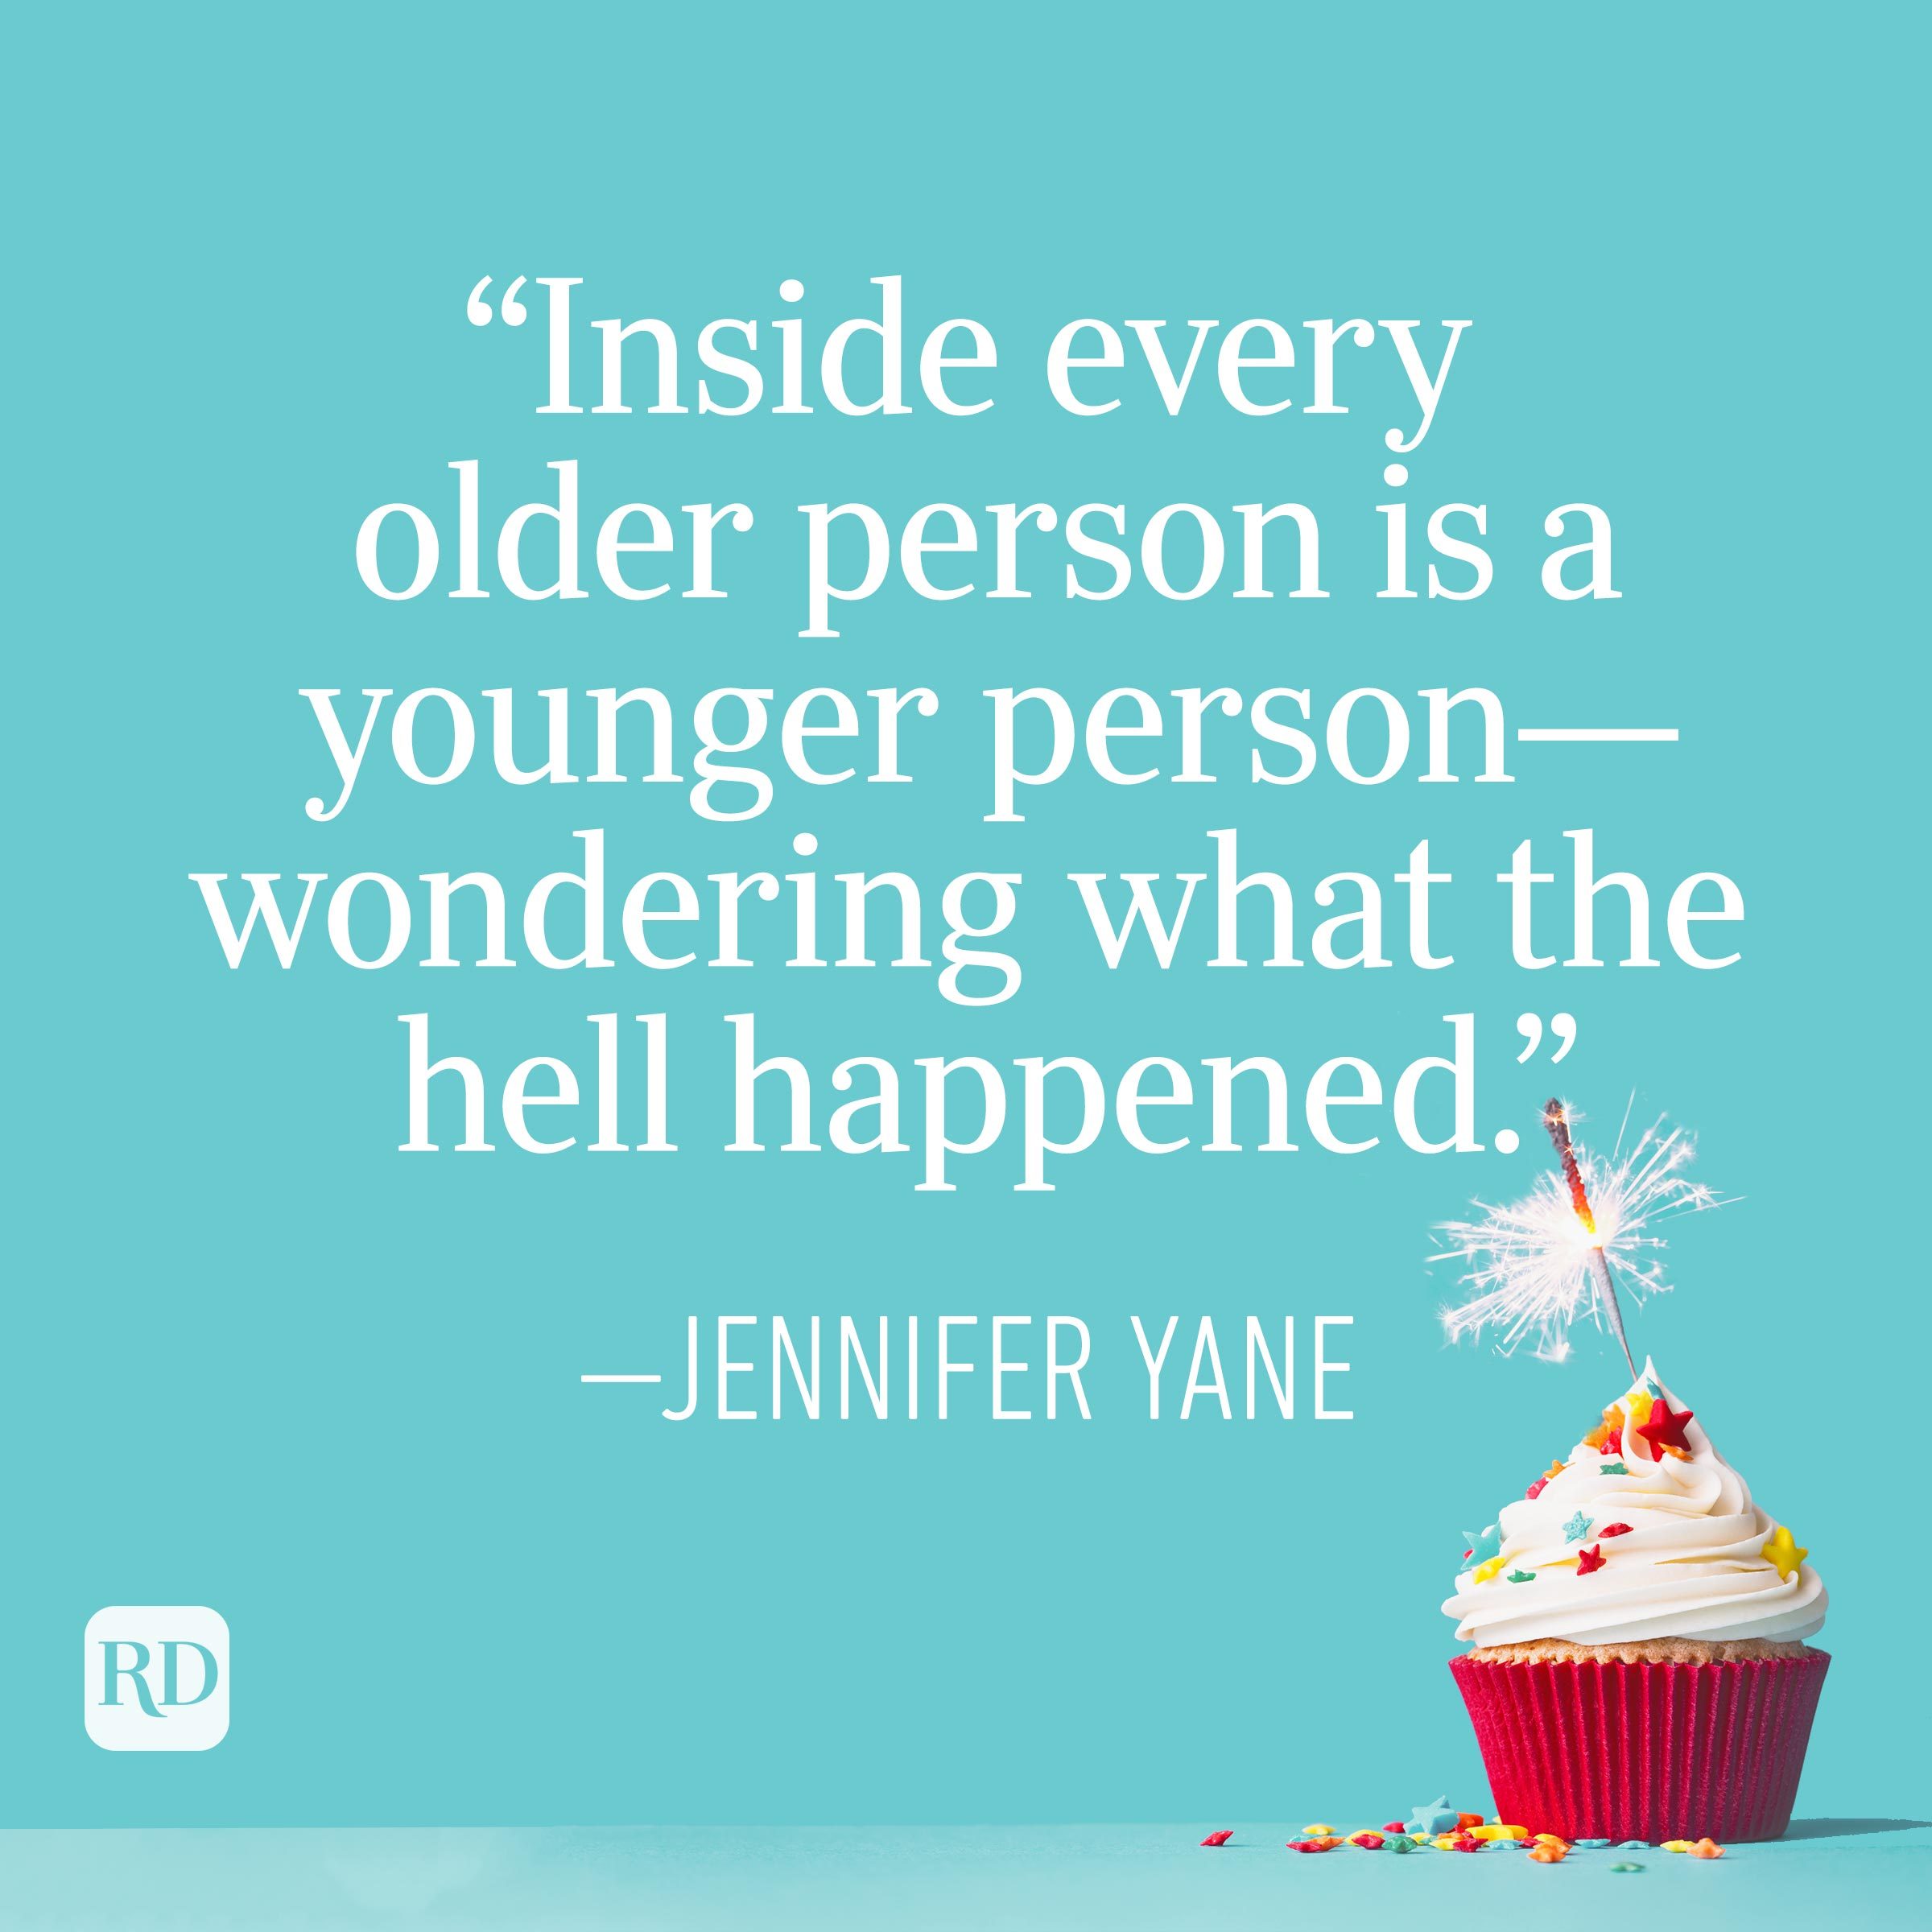 "Inside every older person is a younger person—wondering what the hell happened." —Jennifer Yane